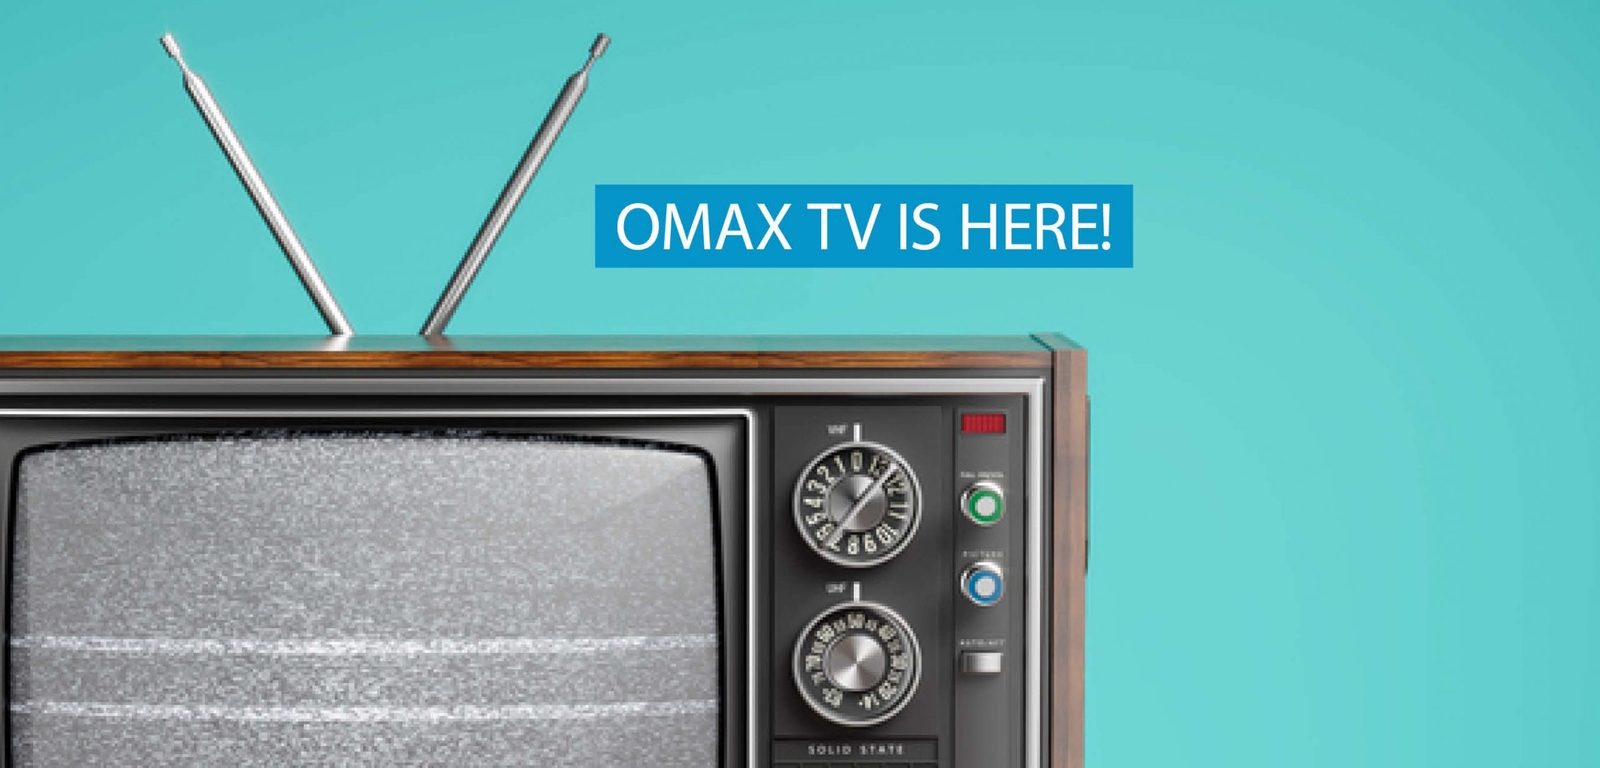 YES, OMAX TV is HERE!